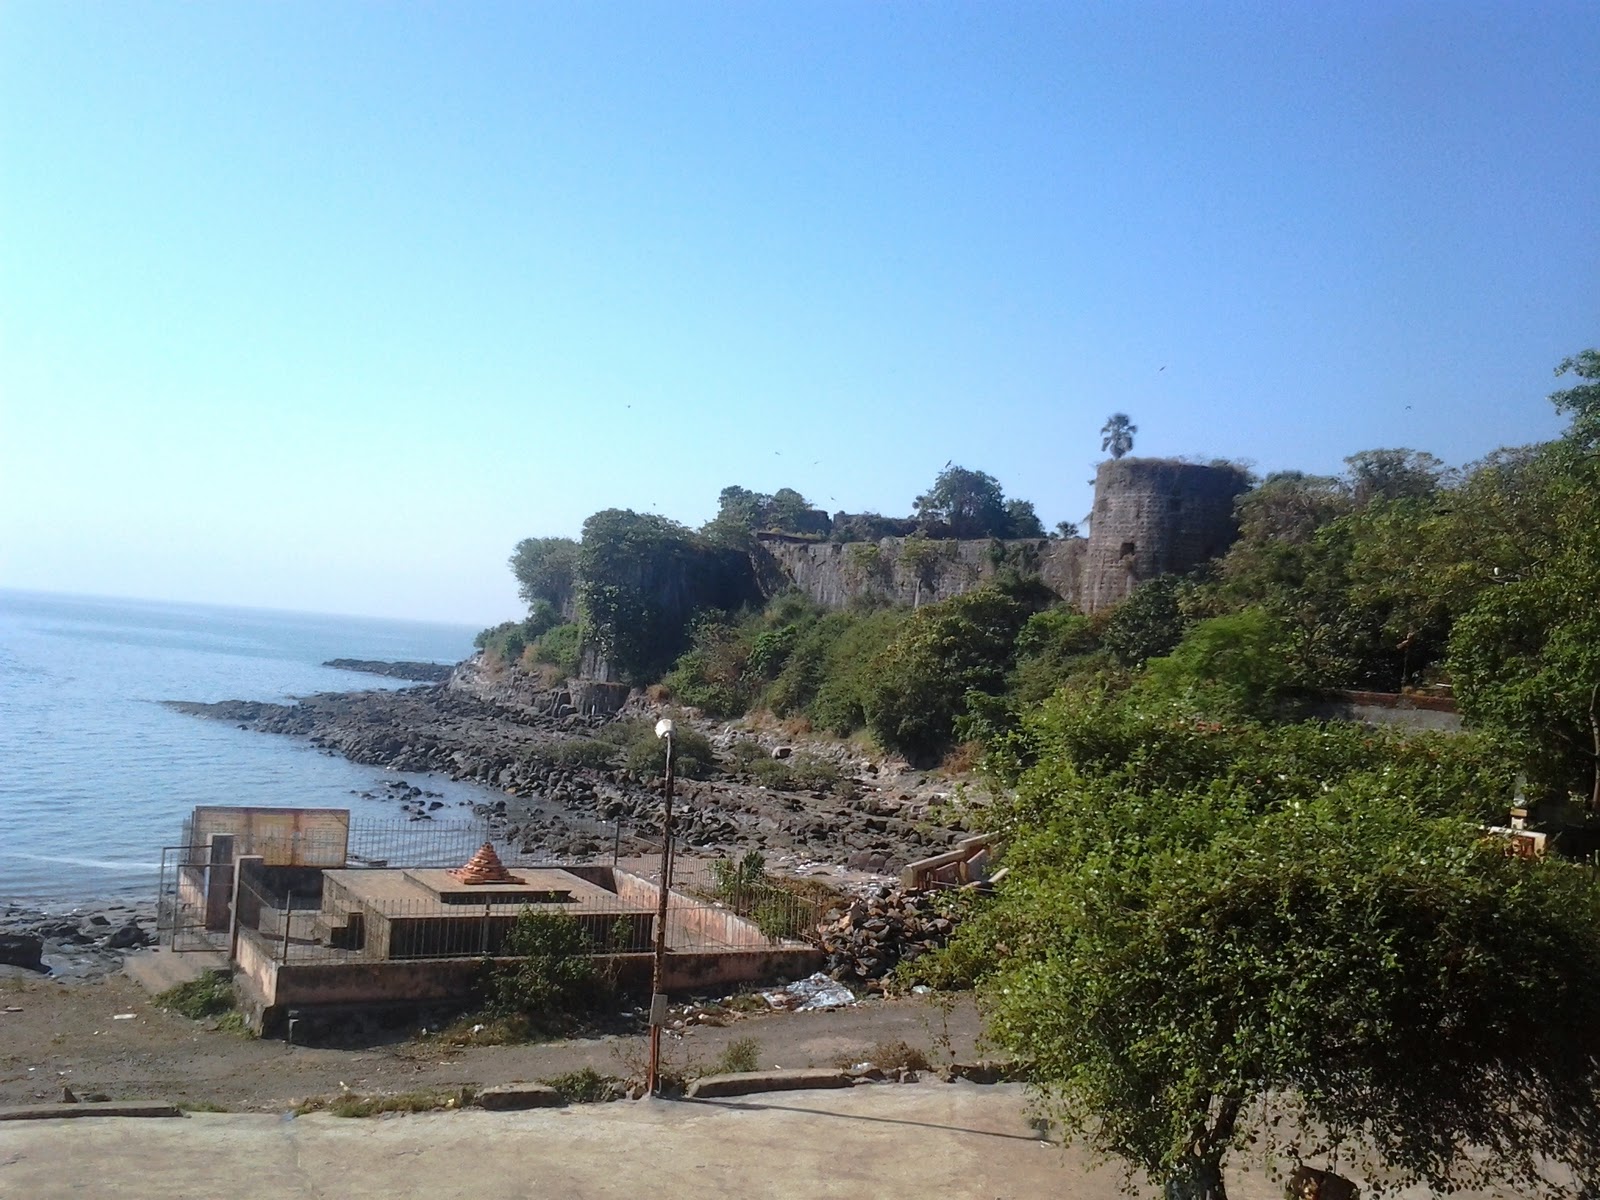 MADH FORT